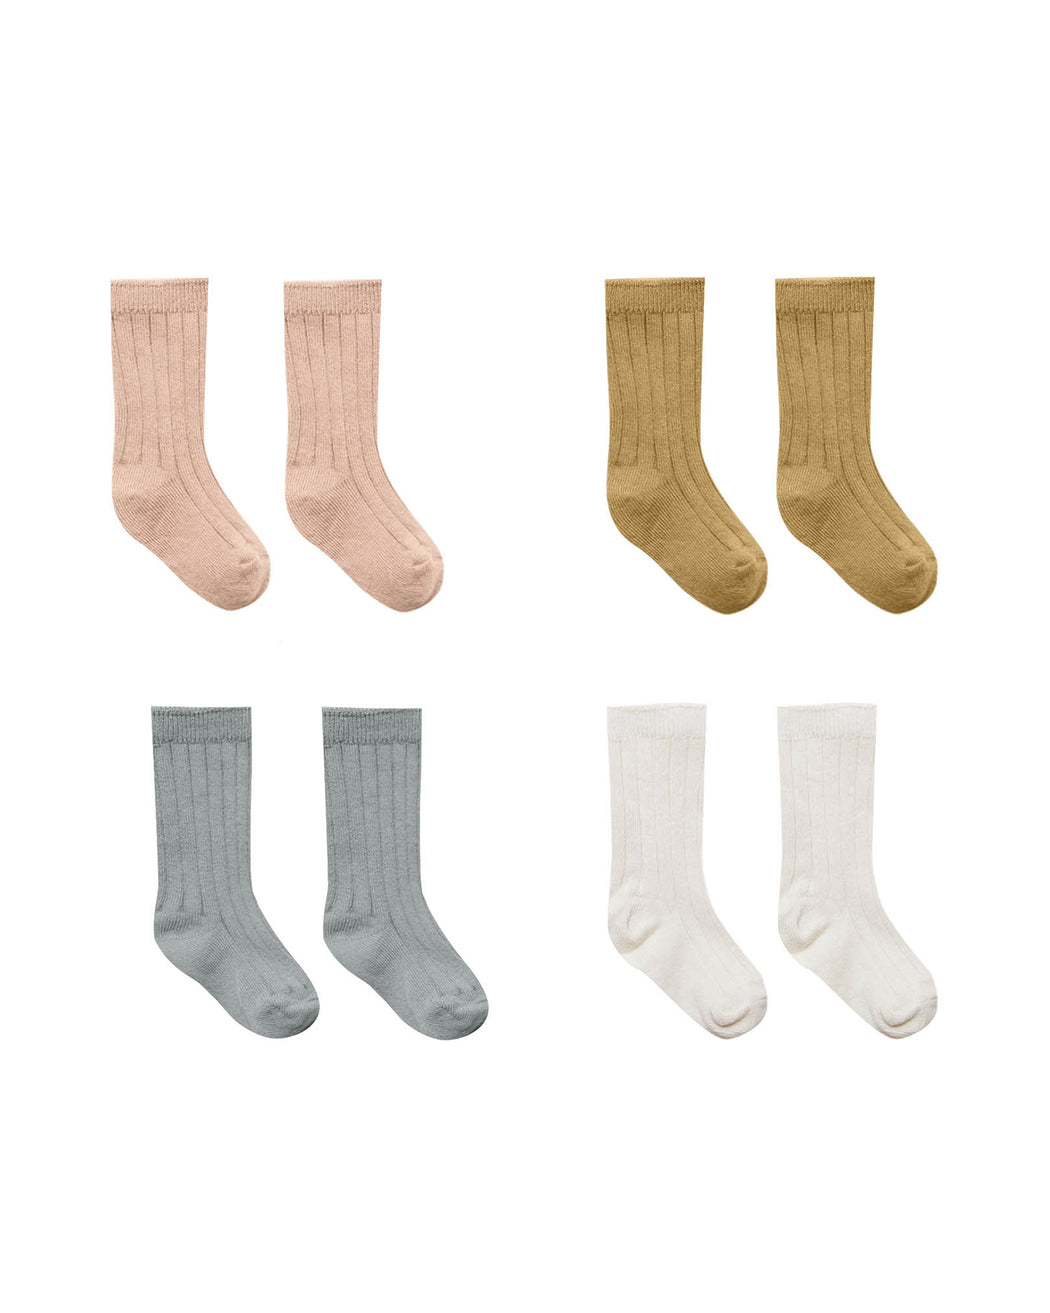 Baby Socks – Assorted Sets of Four